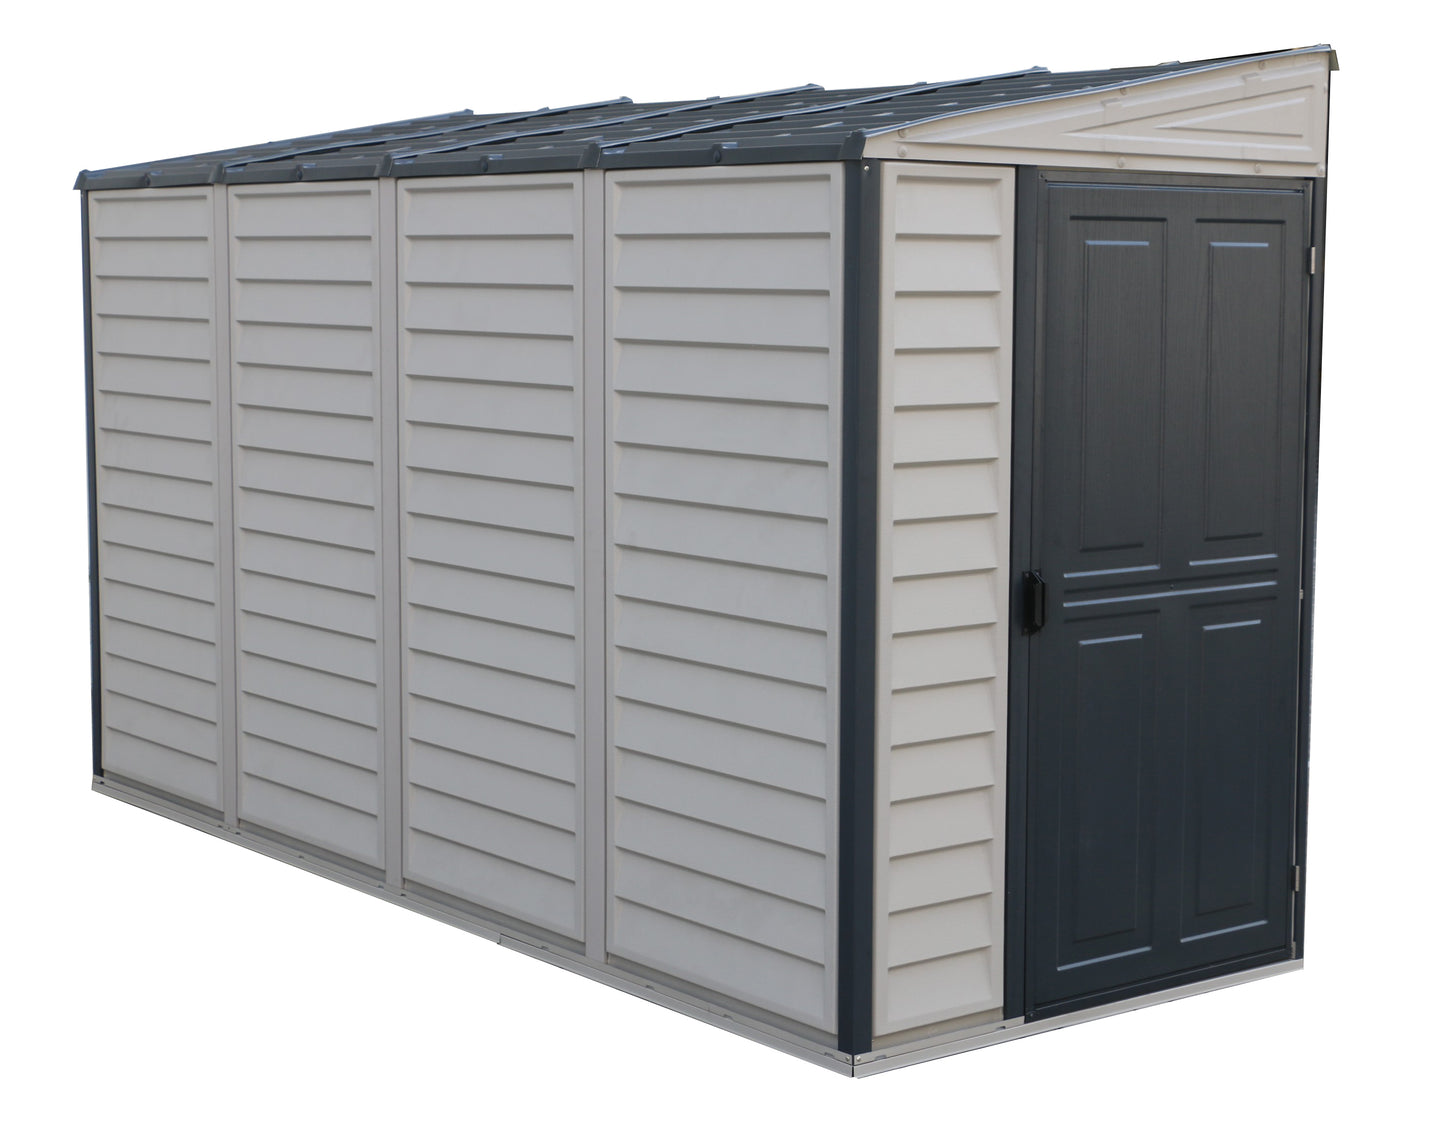 DuraMax Vinyl Shed 4x10 SideMate Plus with Foundation Kit